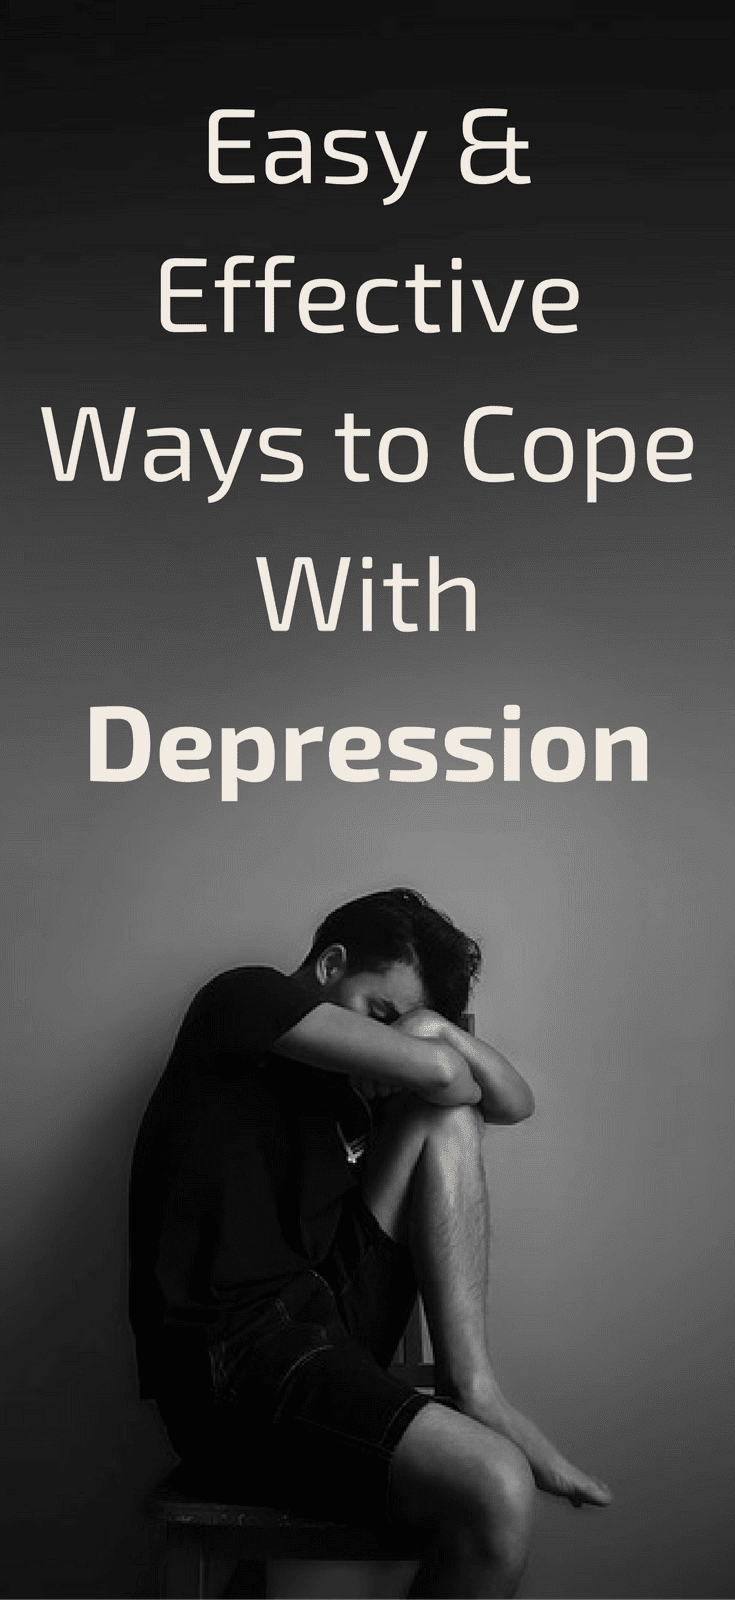 Easy and Effective Ways to Cope With Depression